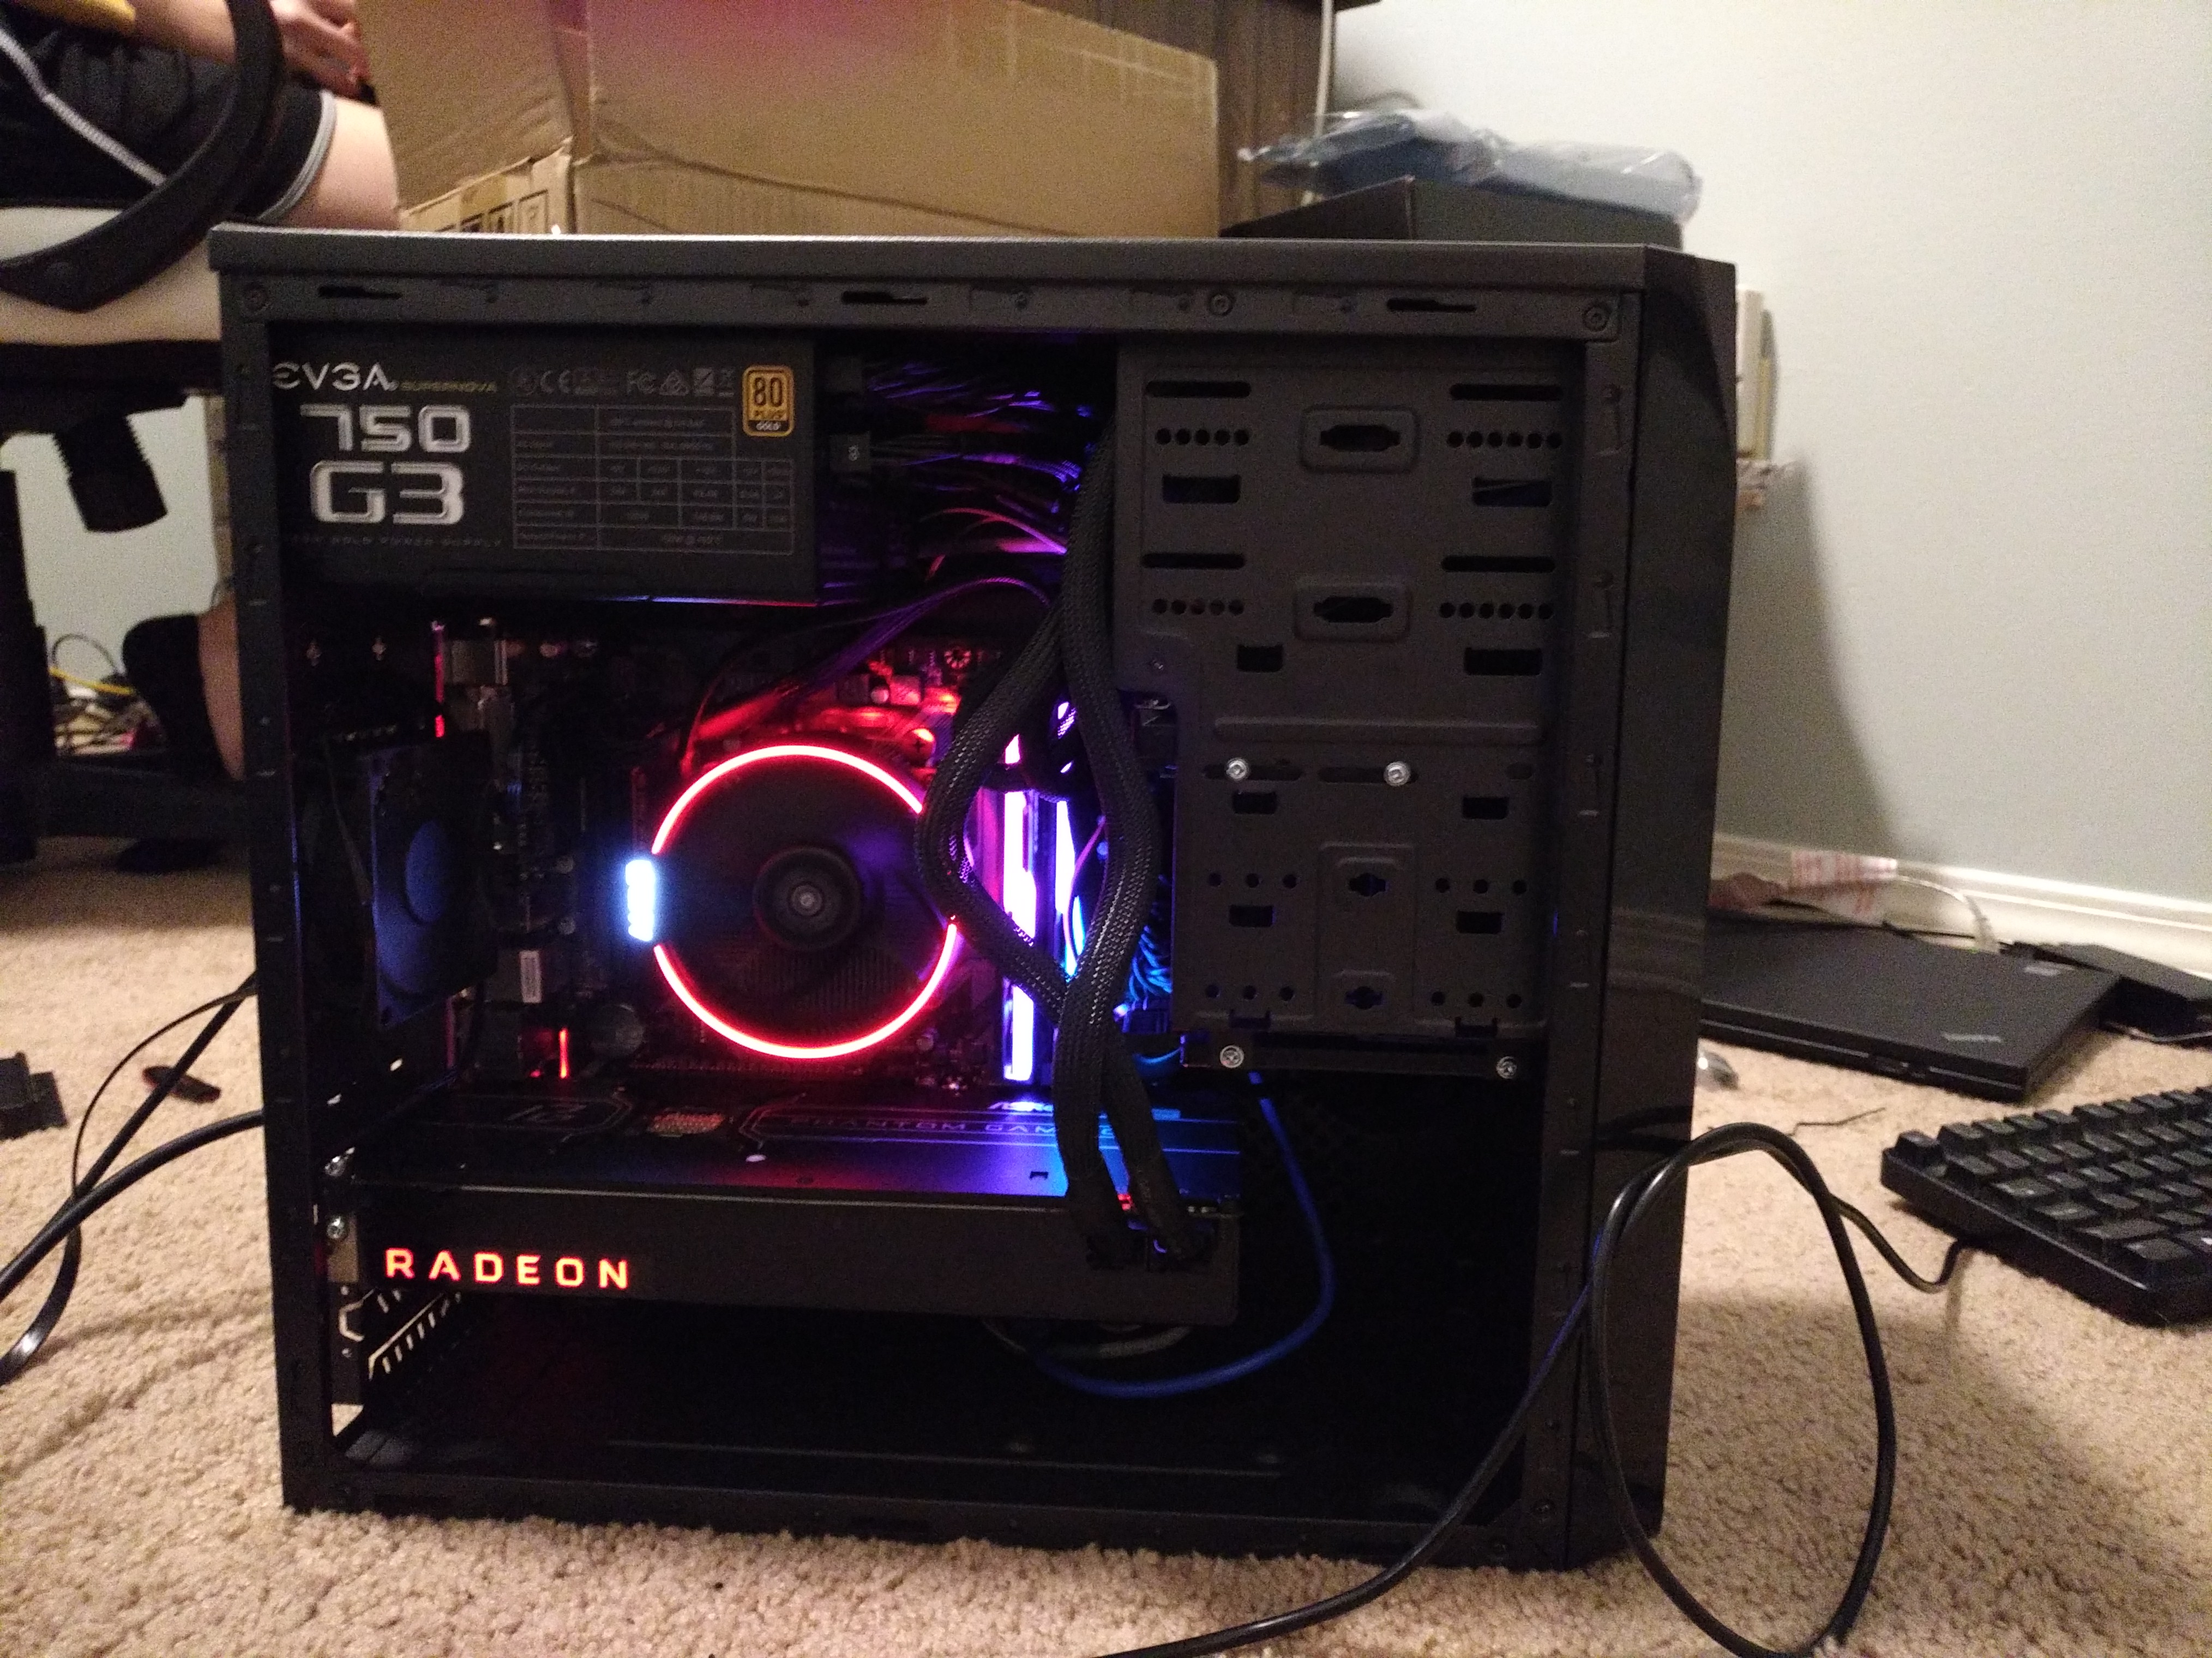 Complete amd computer build, the word RADEON is lit up in red on the side of the gpu and the ram is a vibrant rainbow